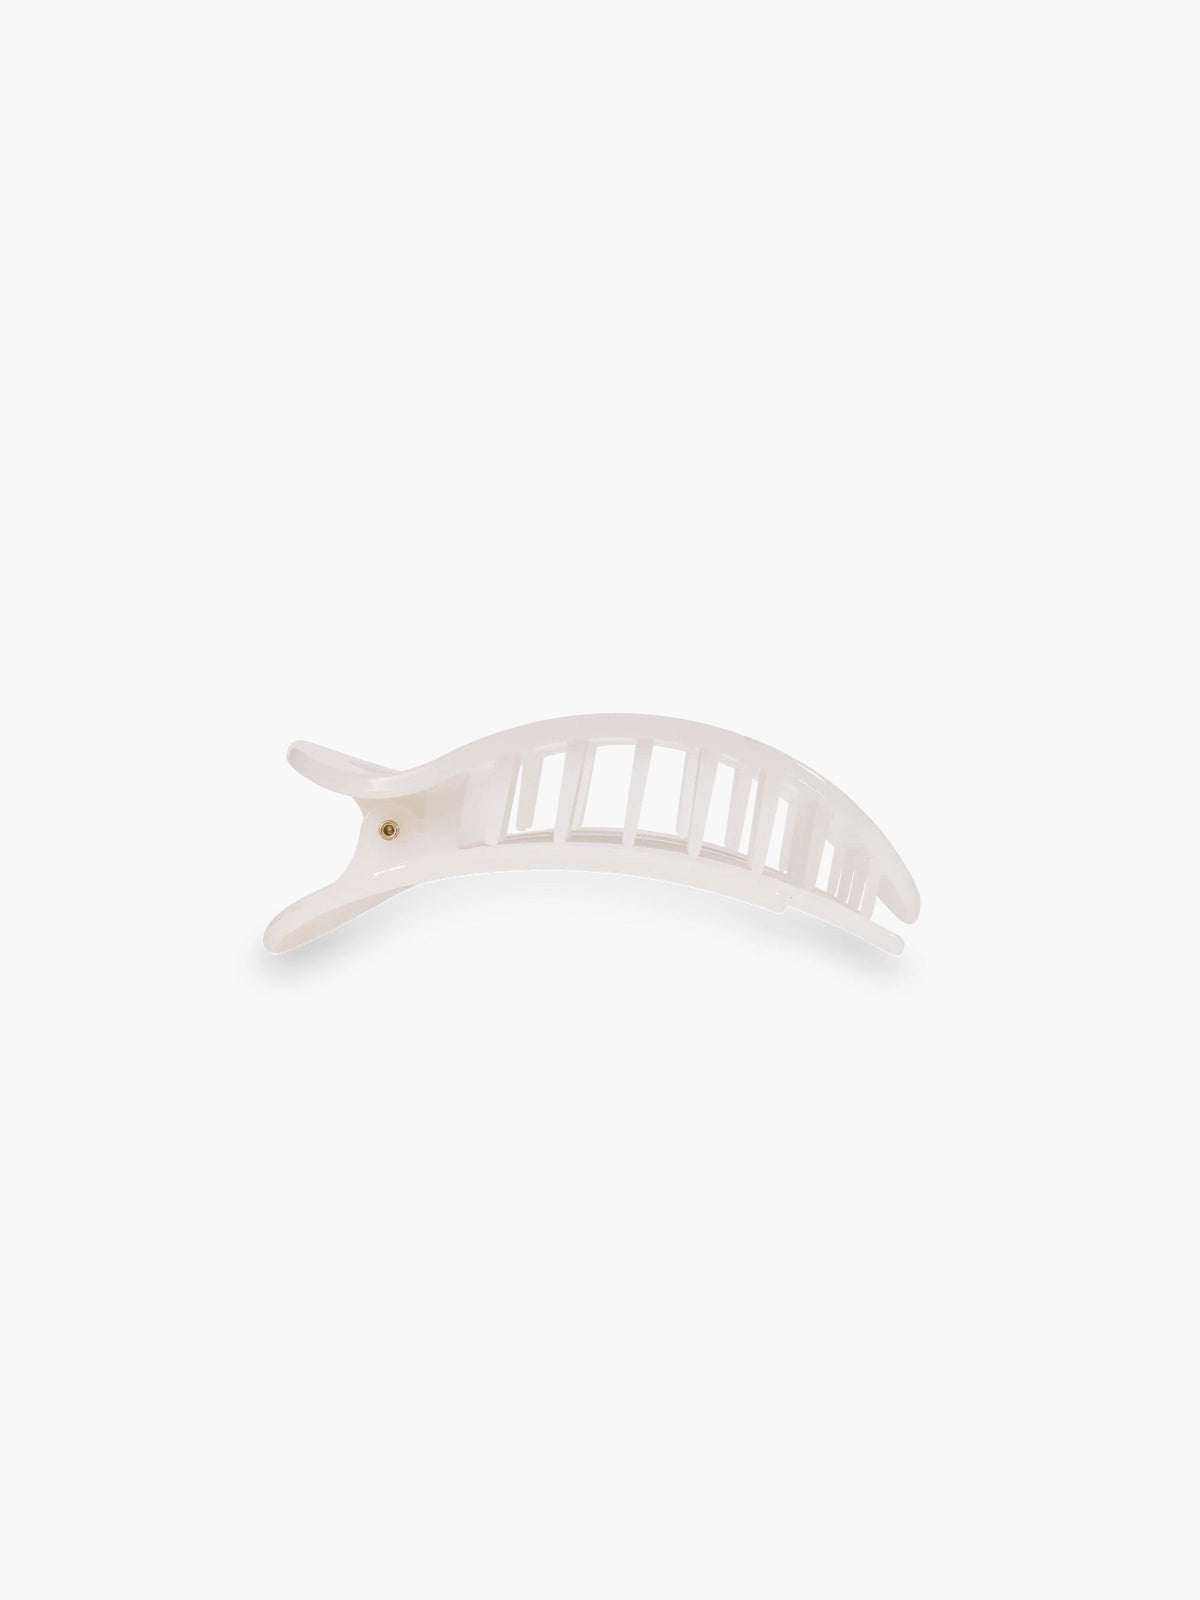 teleties large flat round hair clip in coconut white